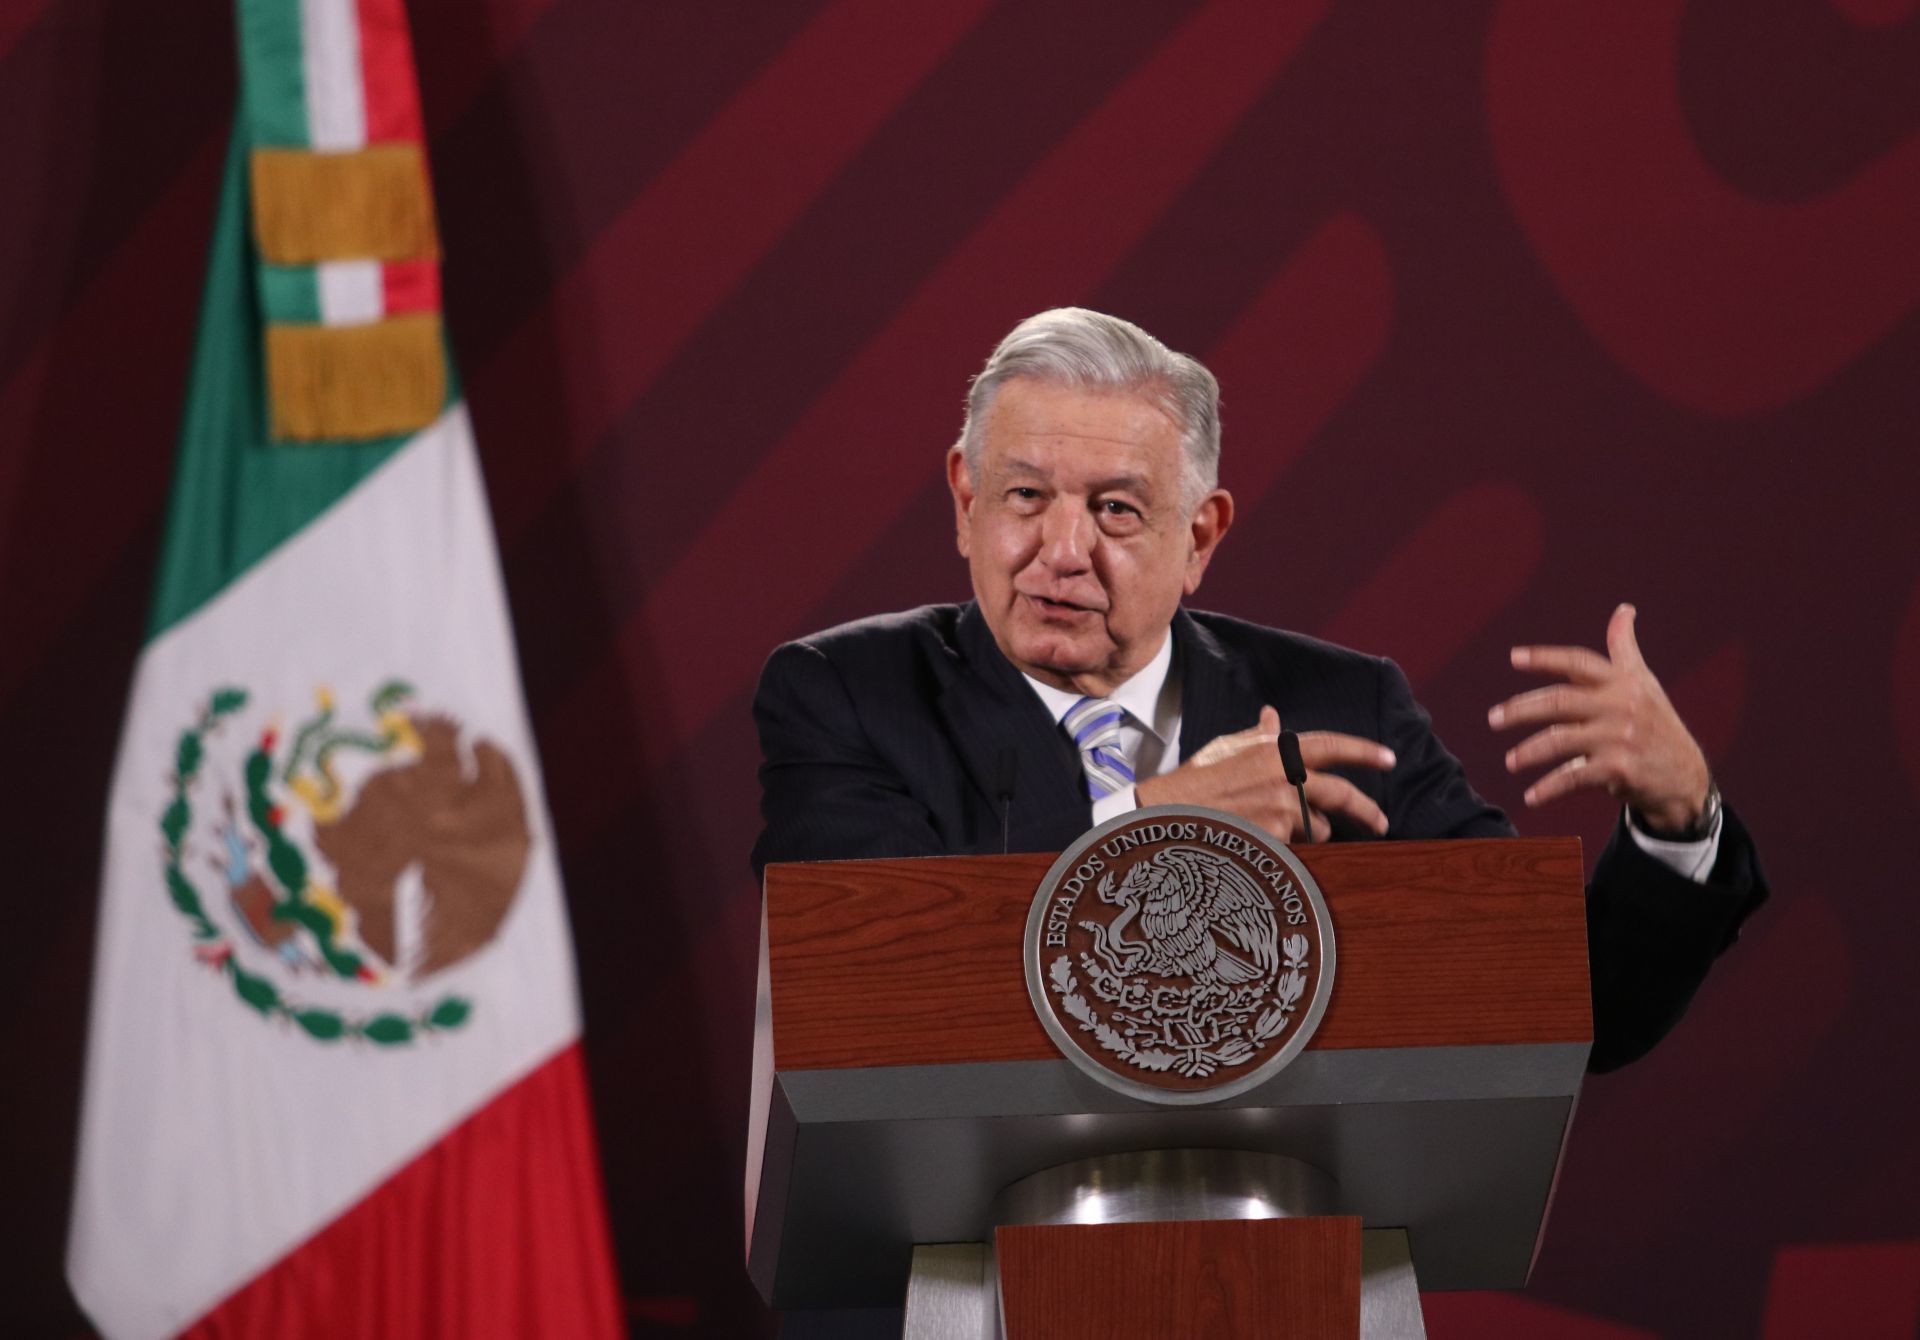 AMLO backs Guadiana for Coahuila in the face of Mejía Berdeja's aspirations